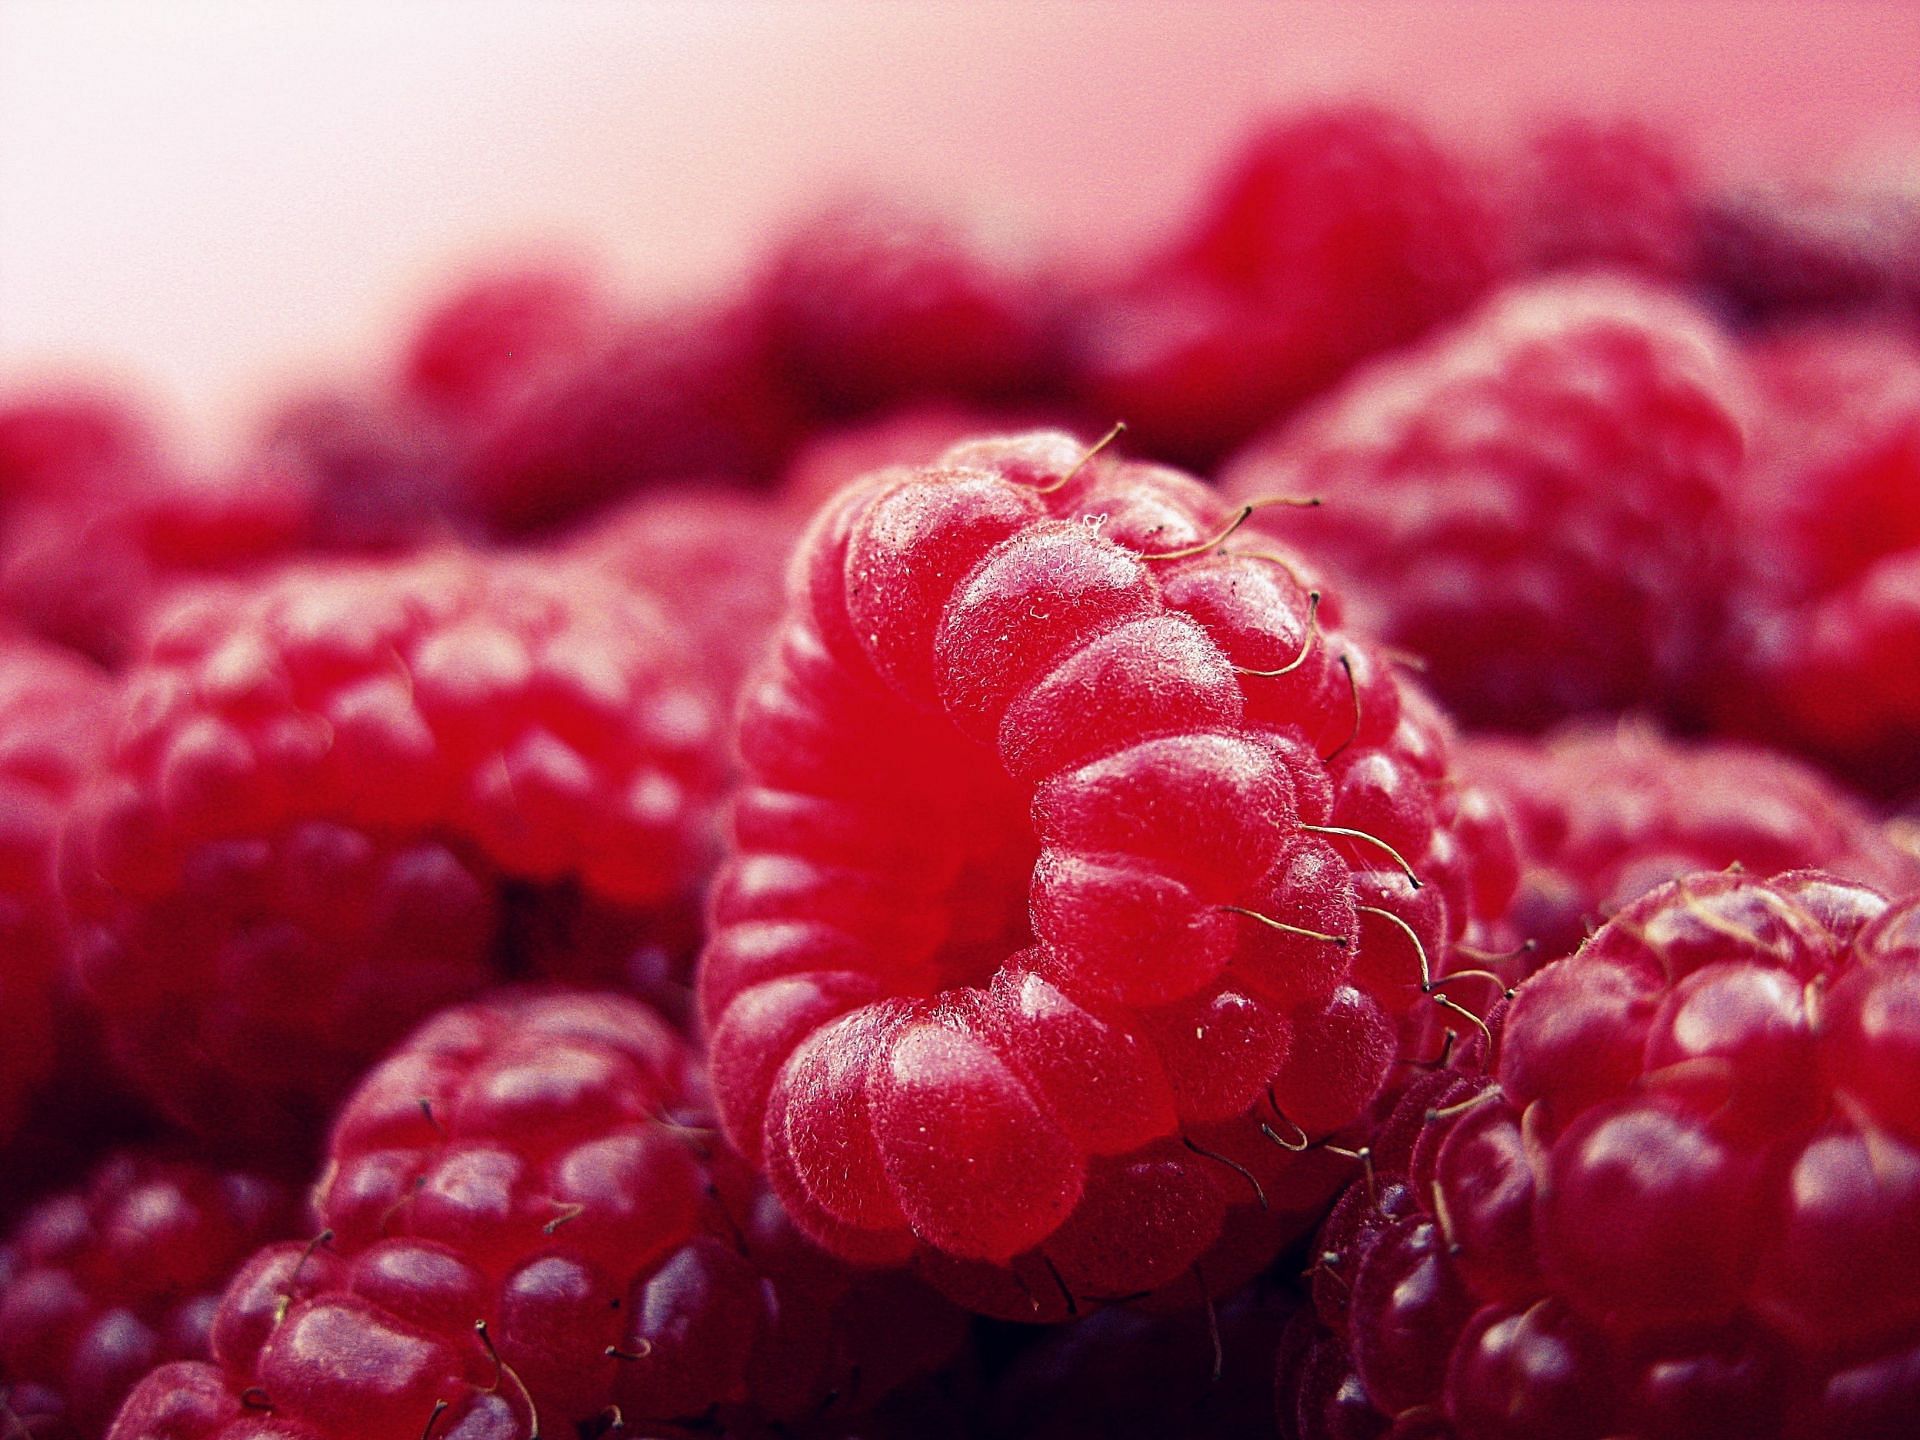 Importance of adding red fruits and vegetables to your diet (image sourced via Pexels / Photo by Pixabay)